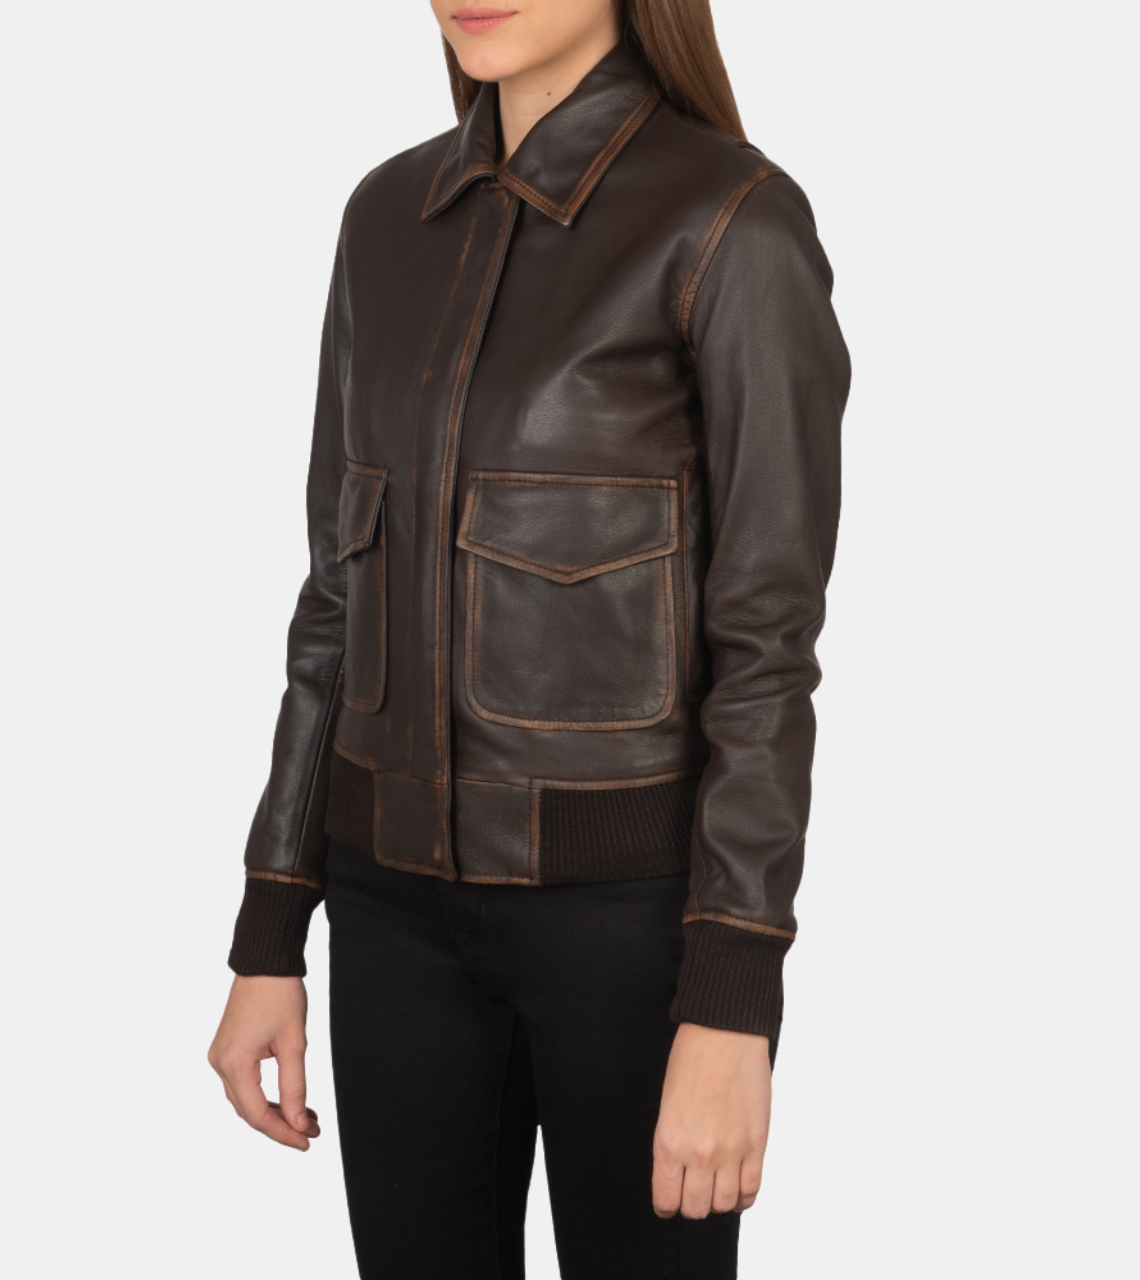  Women's Brown Distressed Bomber Leather Jacket